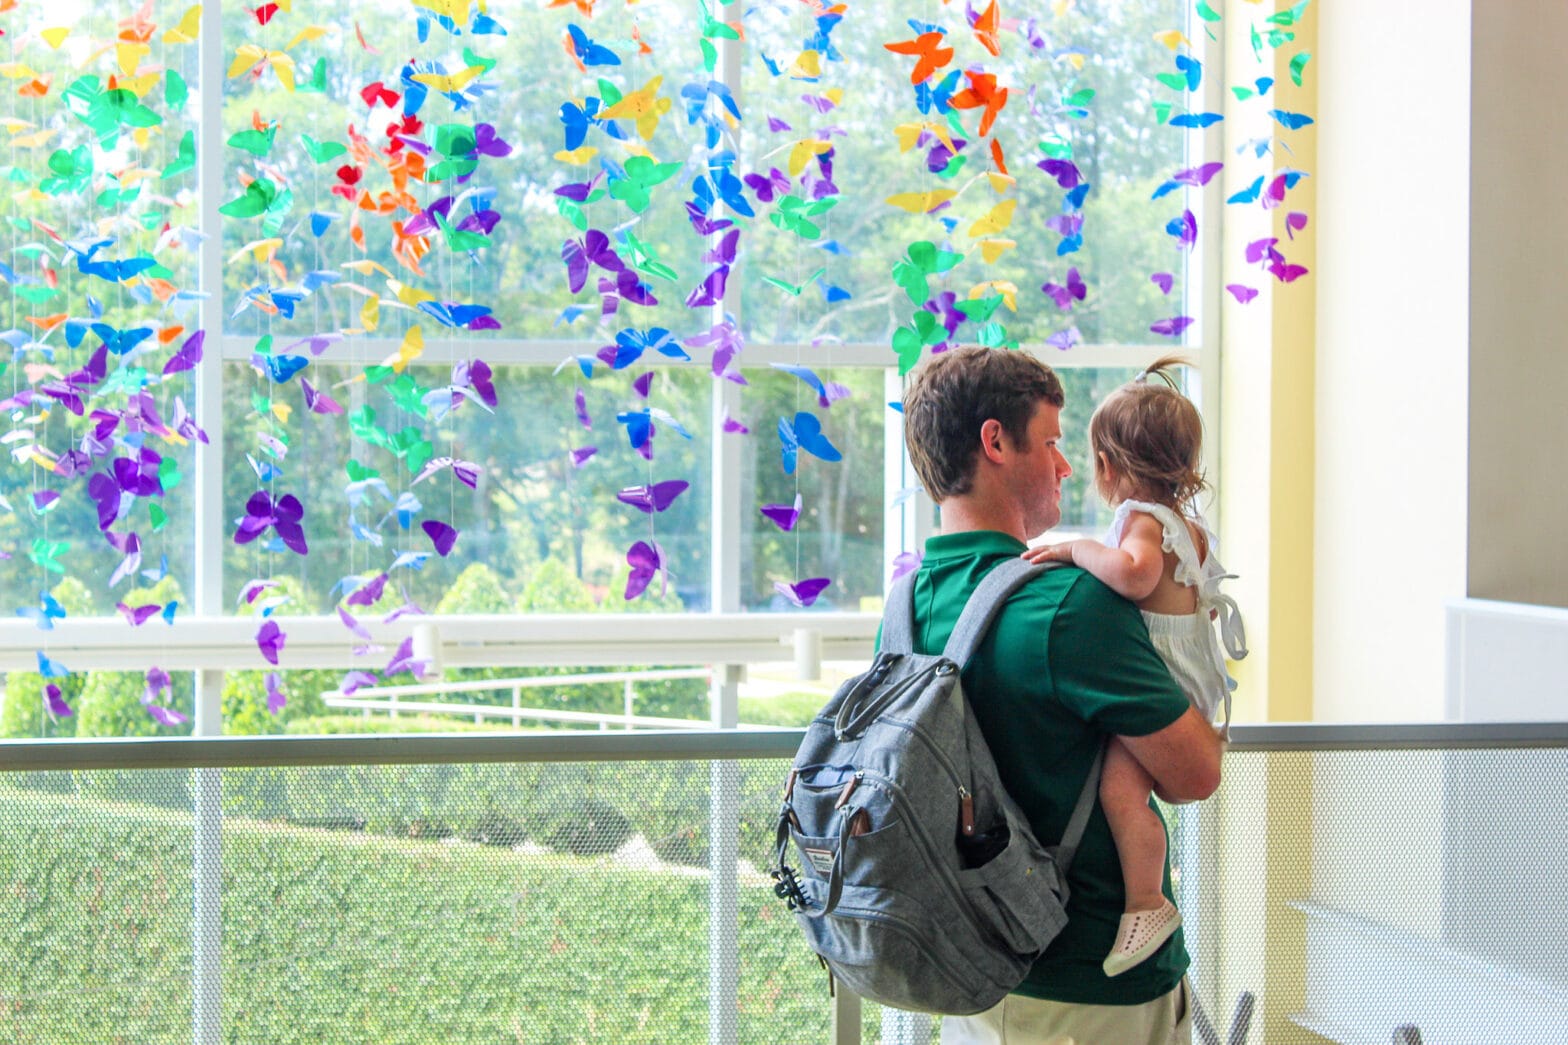 A dad carrying his child around and looking at the colorful paper butterflies